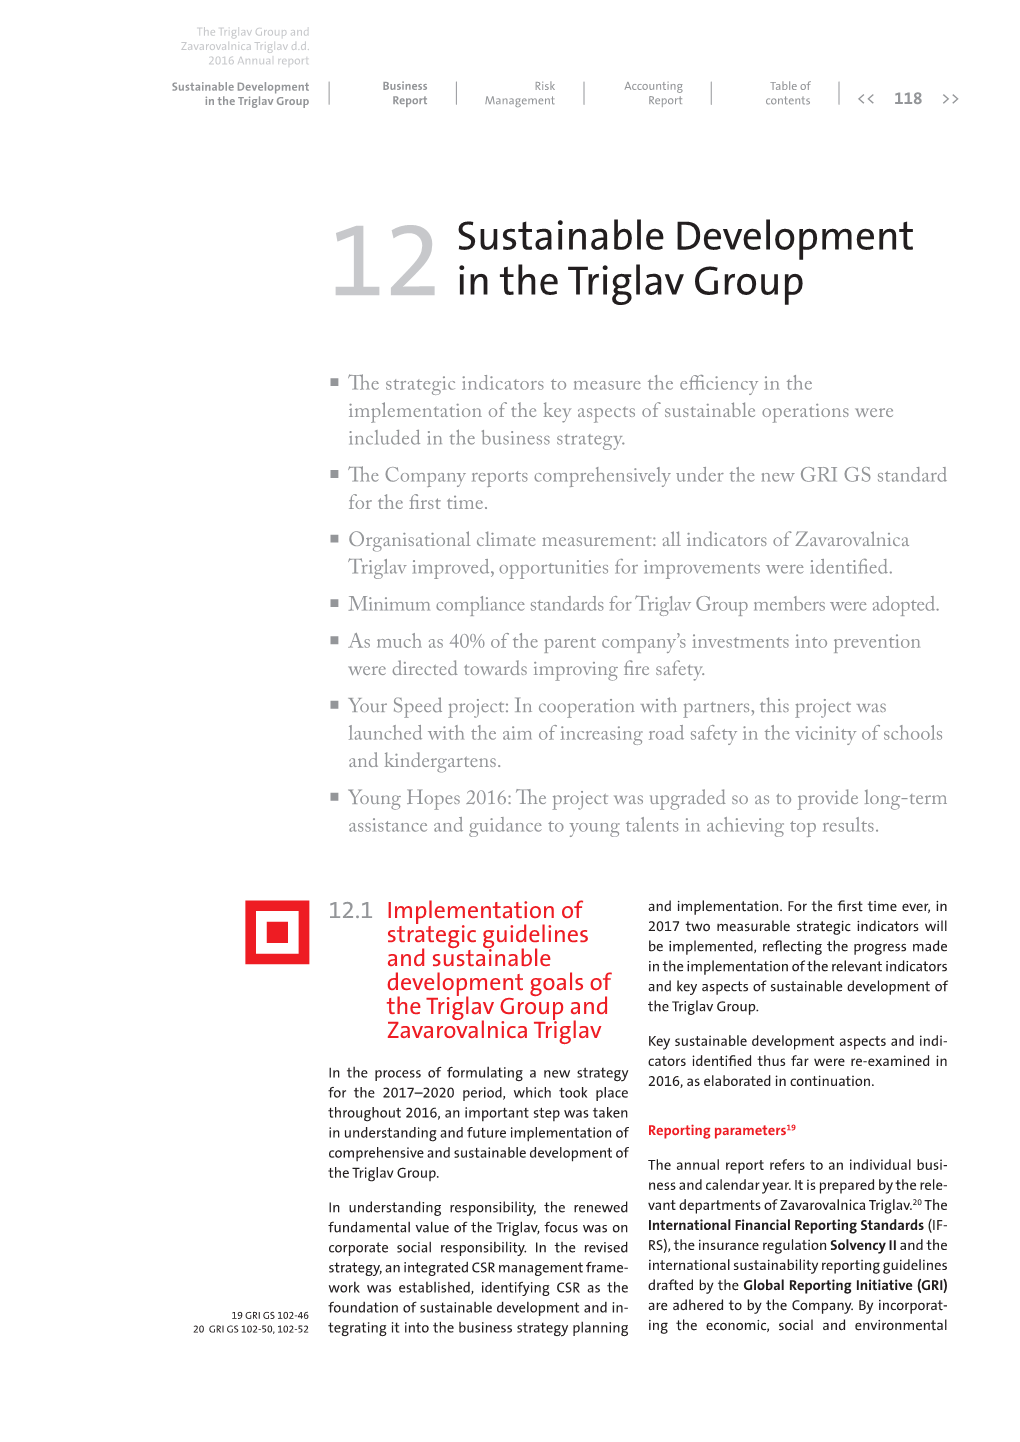 Download Section Sustainable Development in the Triglav Group